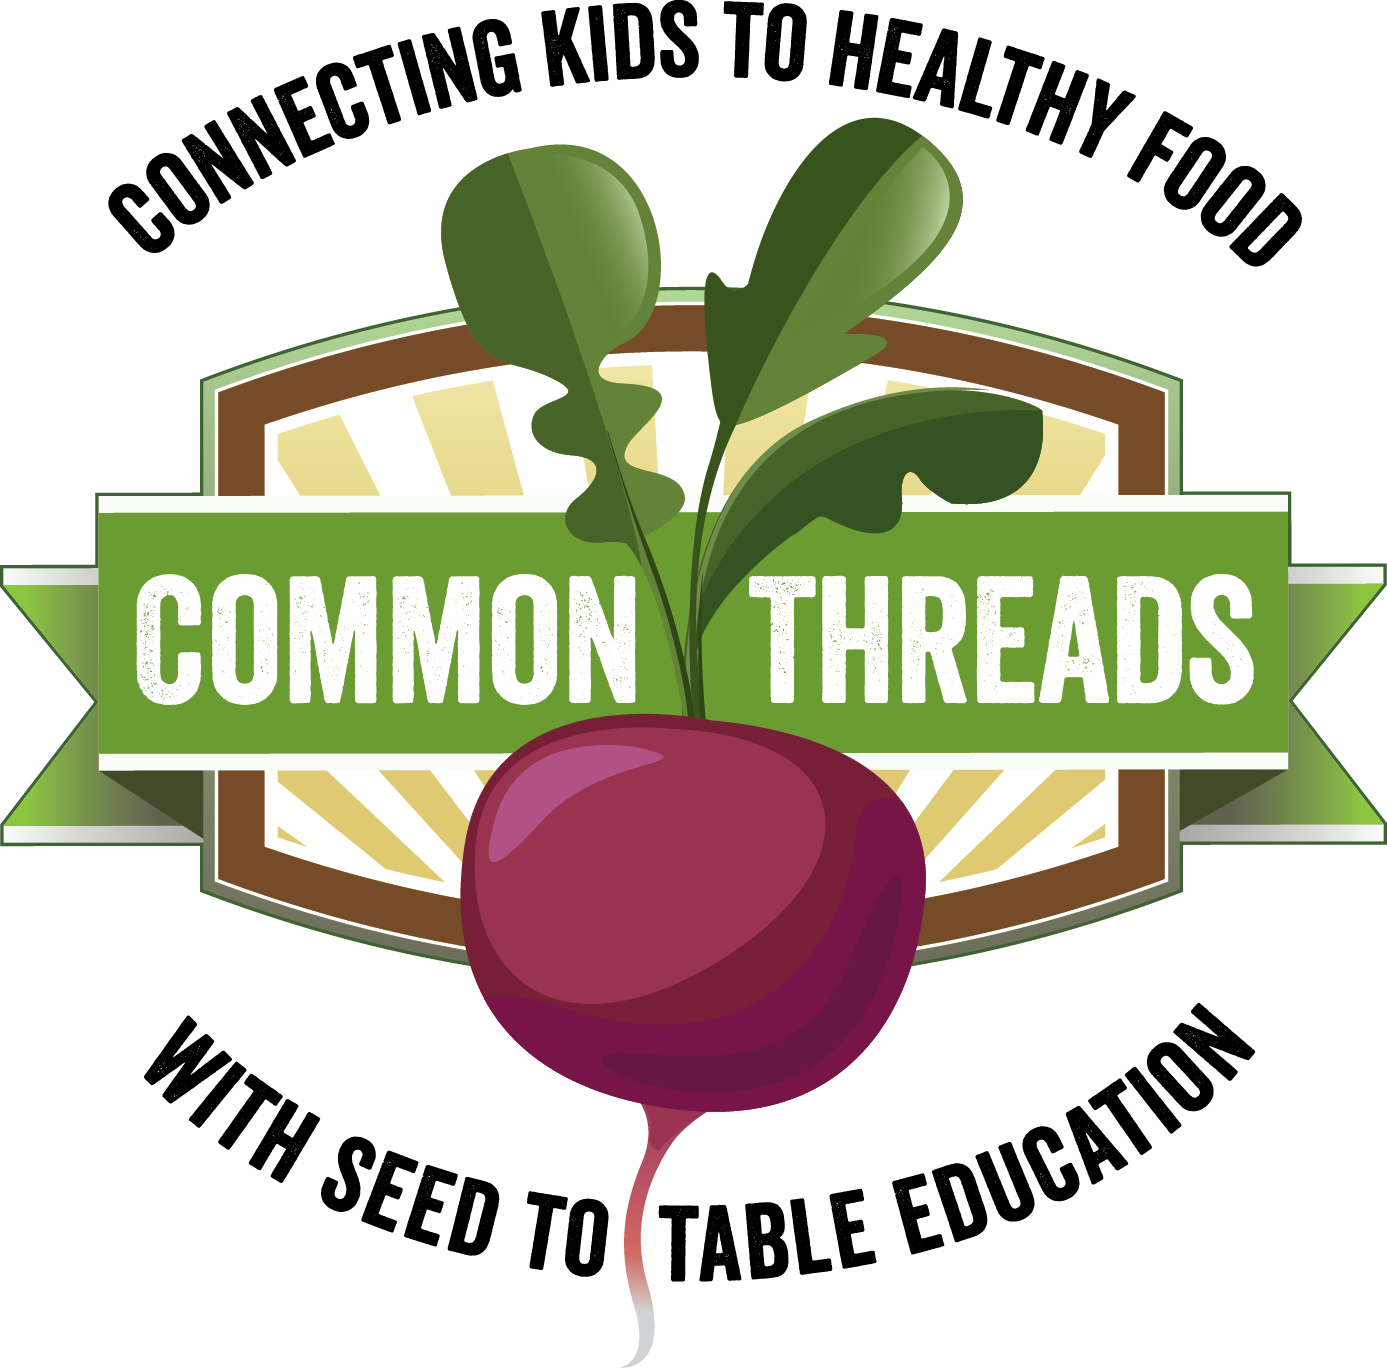 Commonn Threads' logo featuring a purple beet with text around it that says "Con